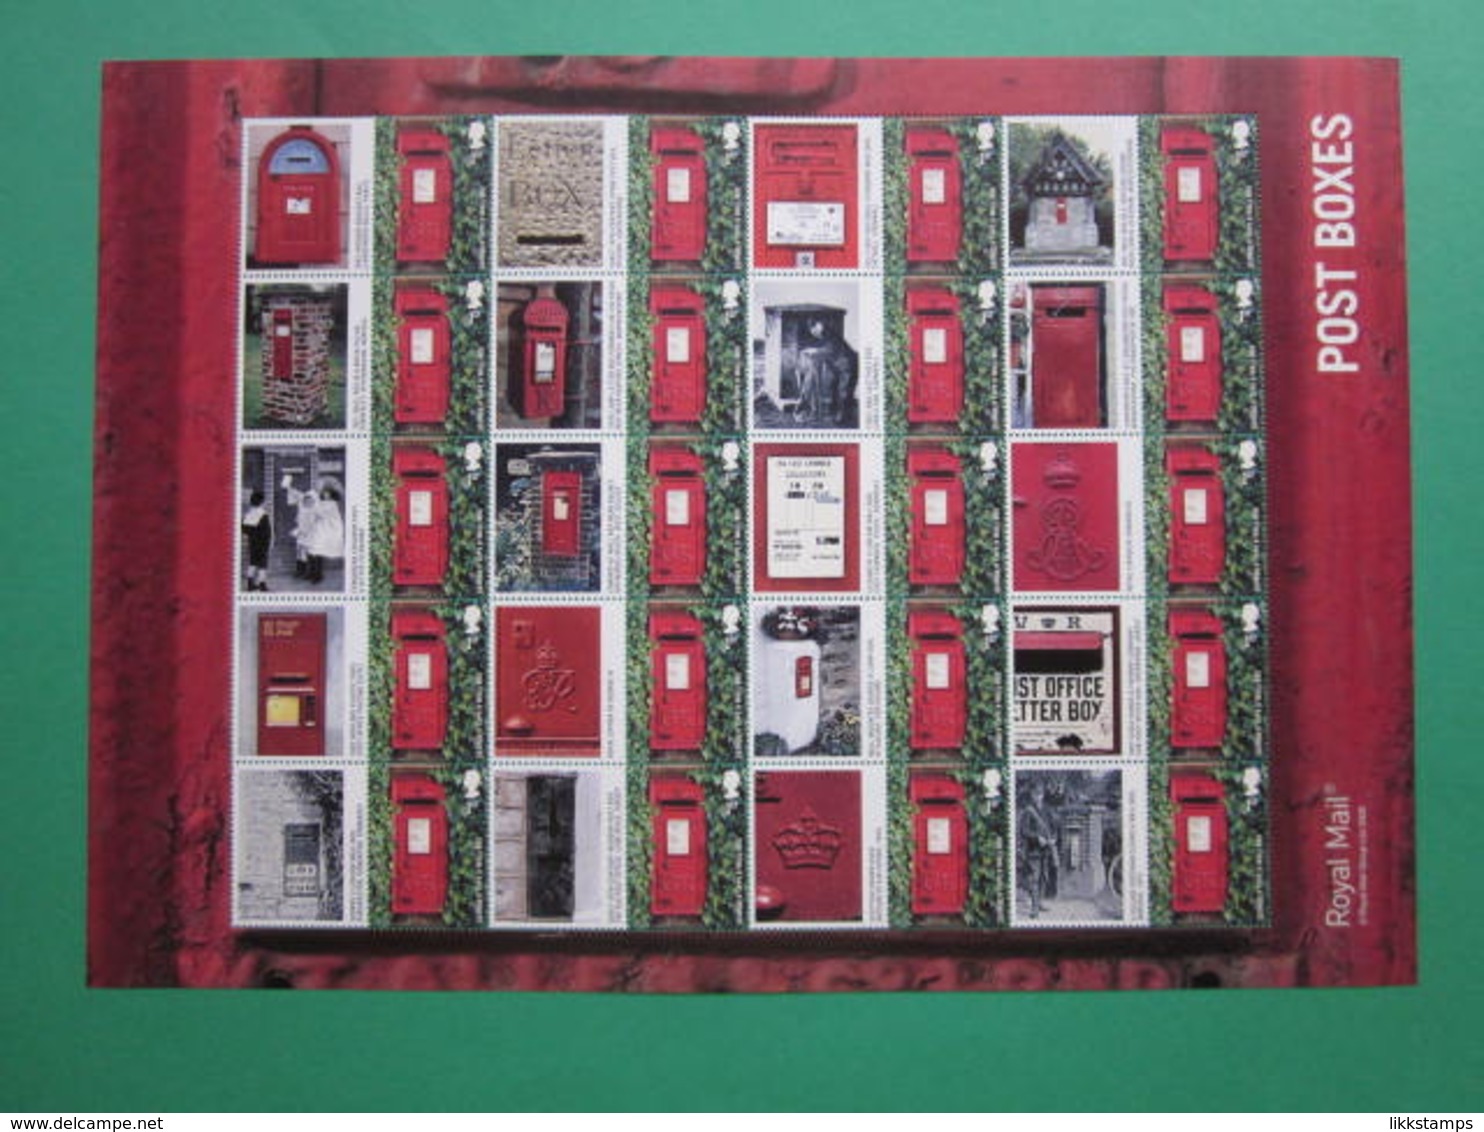 2009 ROYAL MAIL POST BOXES GENERIC SMILERS SHEET. #SS0063 - Timbres Personnalisés